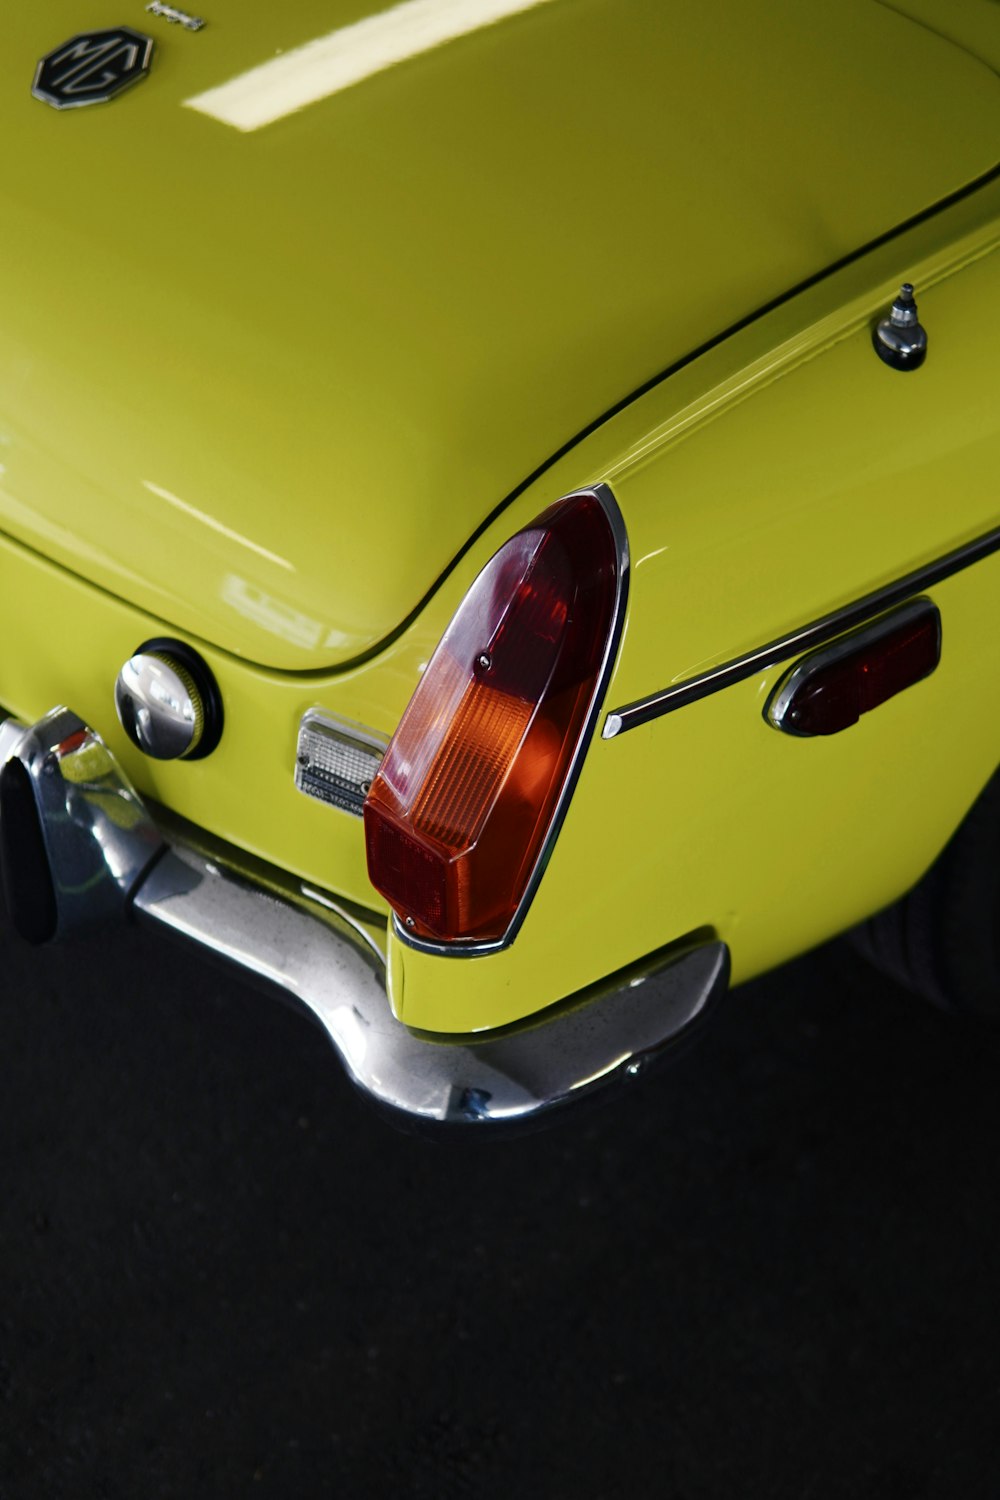 a close up of the tail end of a yellow sports car